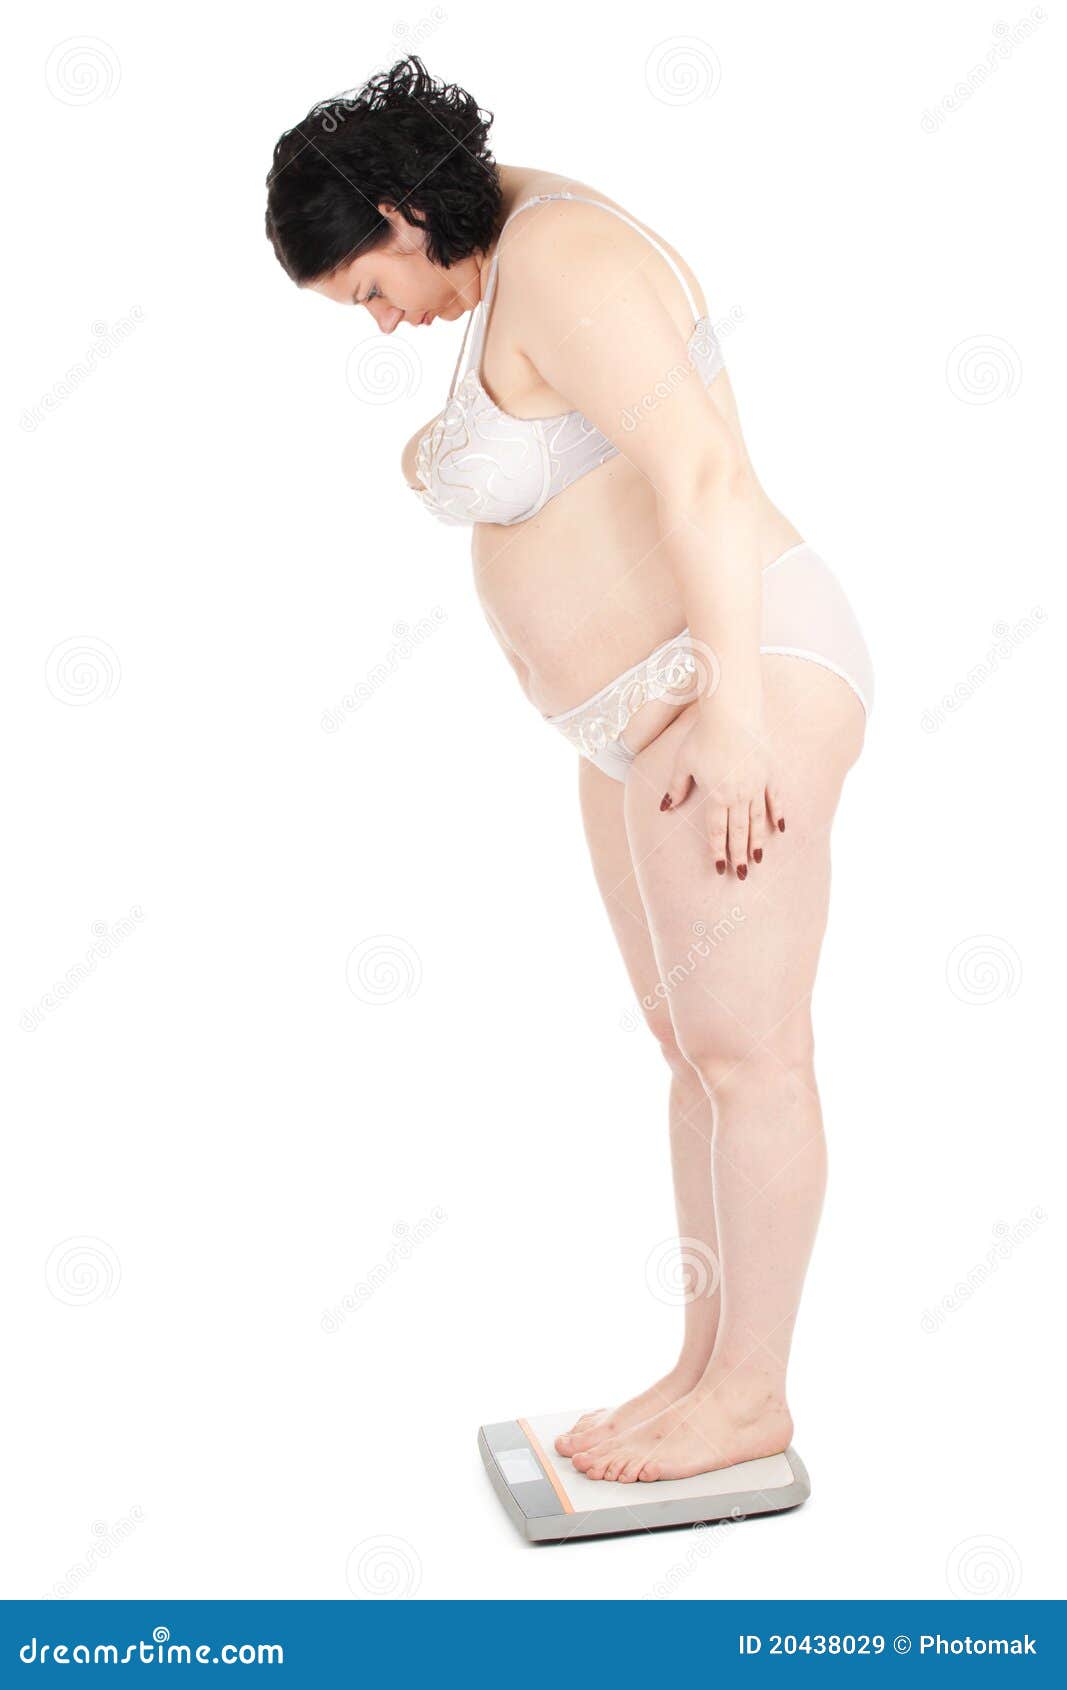 Woman Squeeze Belly Fat Wearing Black Underwear Bra and Pant on Stock Image  - Image of asian, obese: 56280543